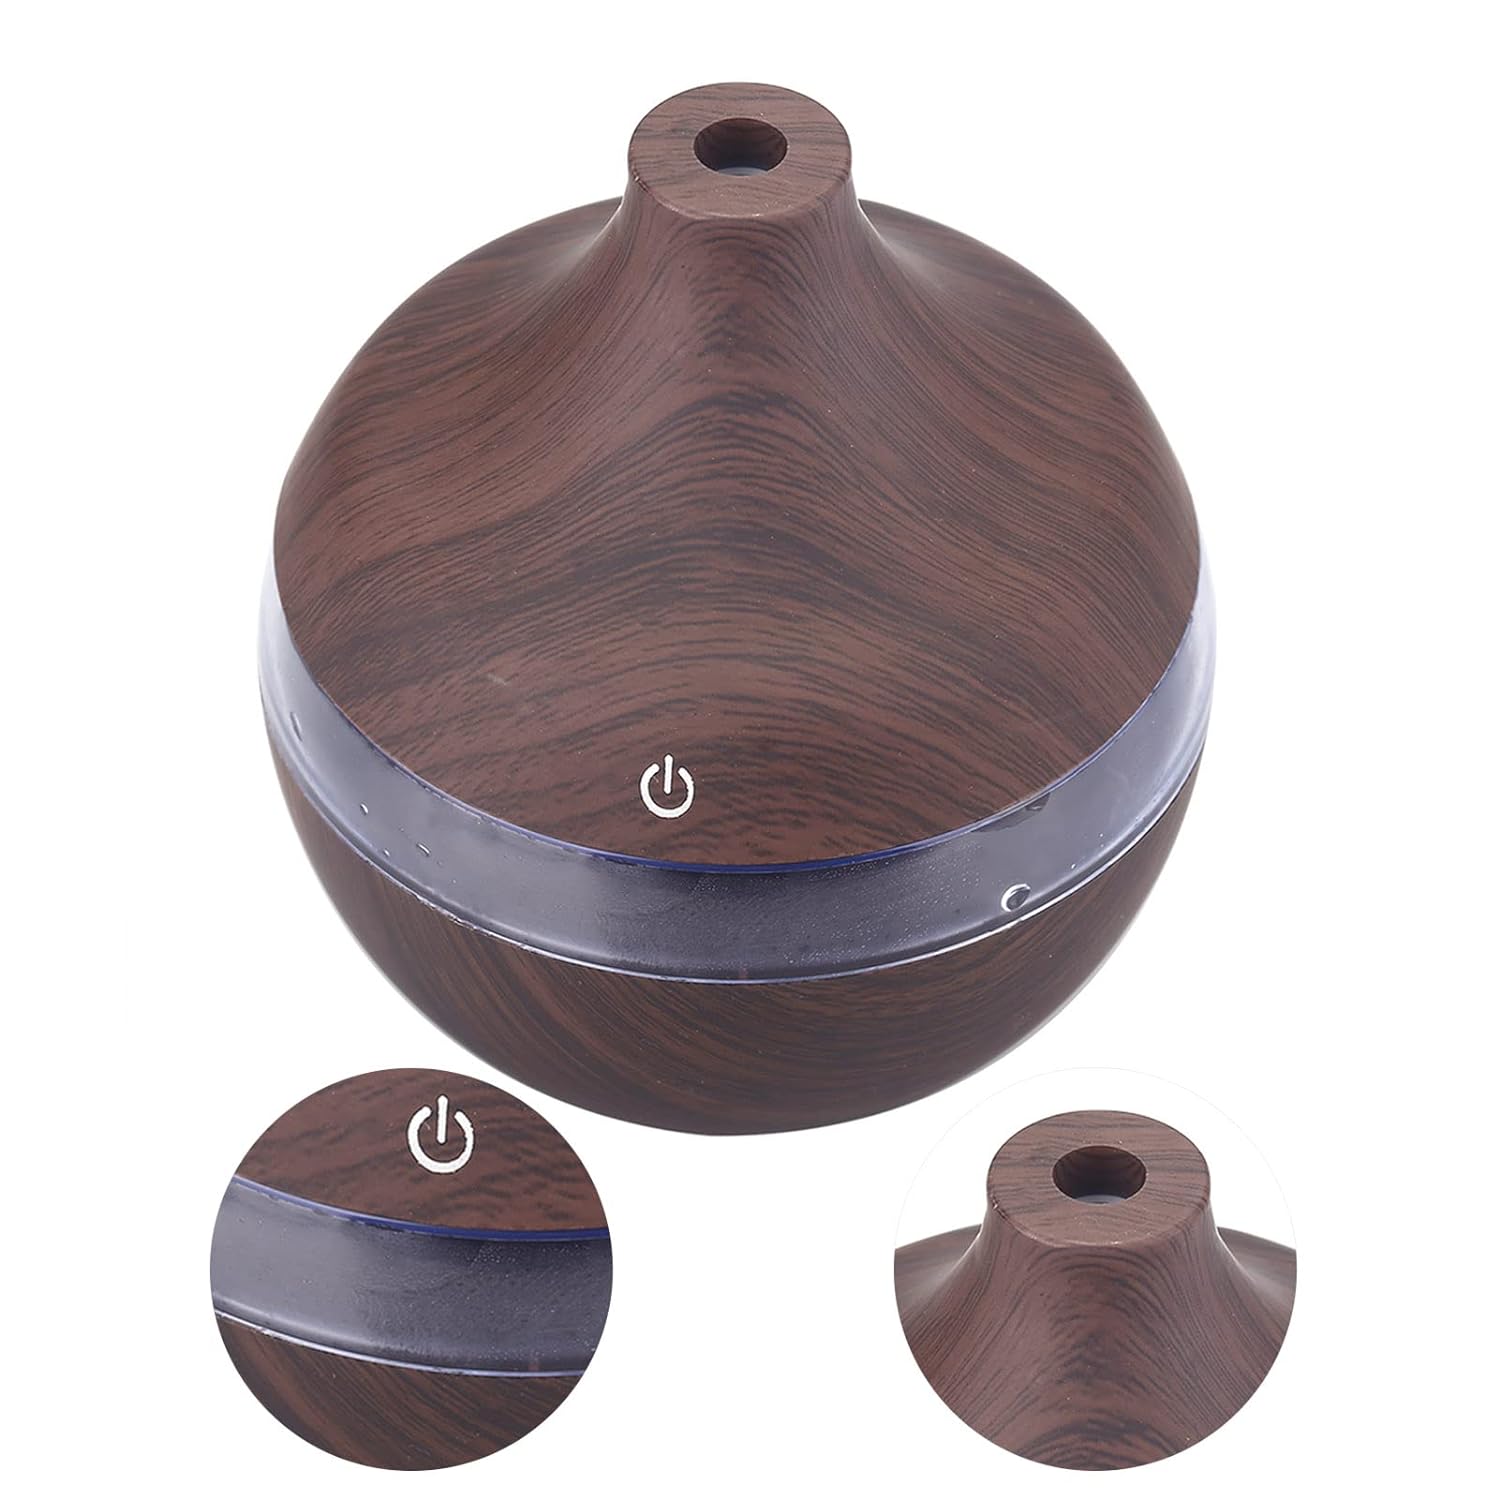 Wood Grain Humidifiers for Home, Top Fill Wood Grain USB Humidifier LED Night Light Mist Maker Ideal for Bedroom Office Nursery Car Baby Water Drop Shape Compact Design